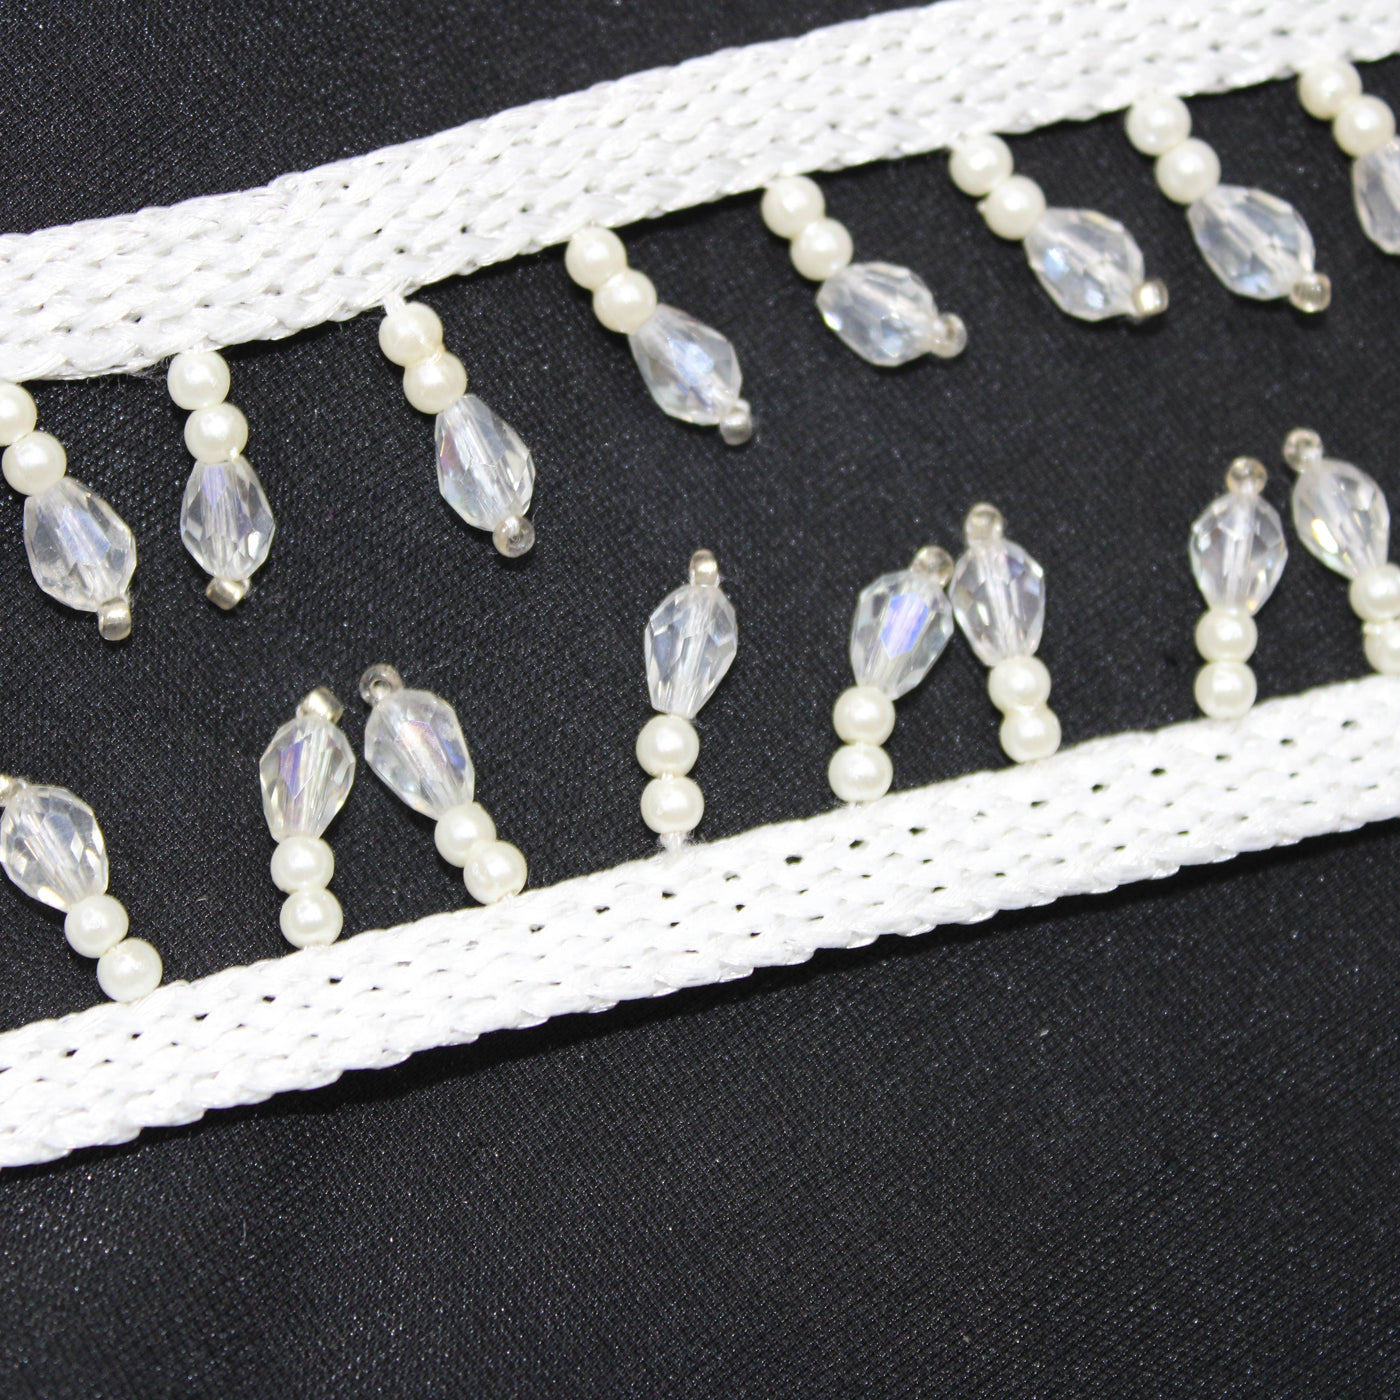 White Transparent Crystal Beads Work Embroidered Border (Wholesale)